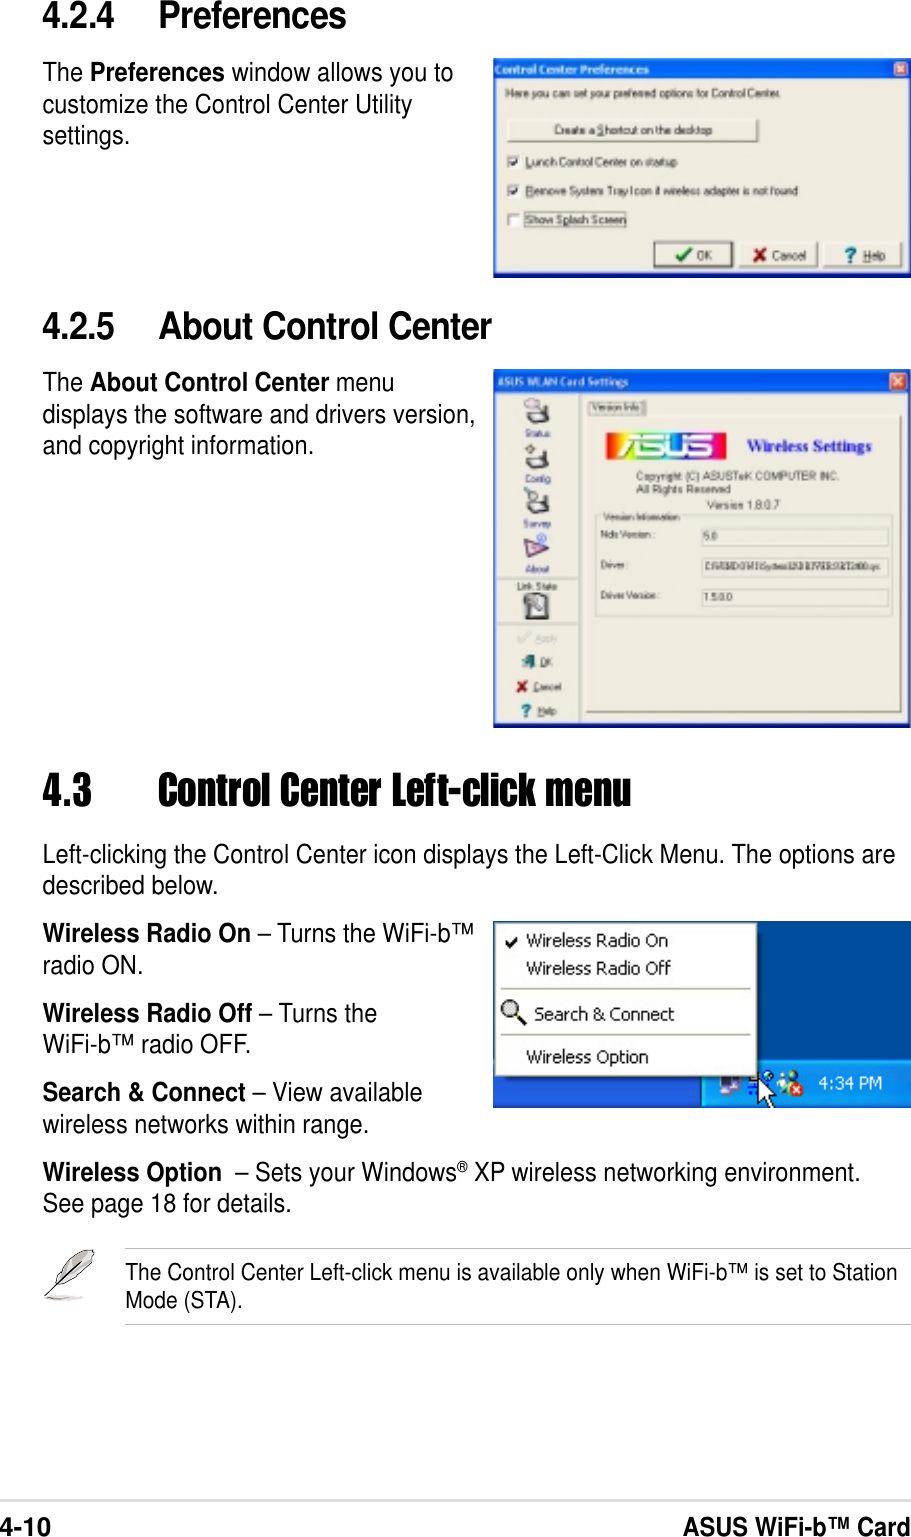 4-10ASUS WiFi-b™ Card4.3 Control Center Left-click menuLeft-clicking the Control Center icon displays the Left-Click Menu. The options aredescribed below.Wireless Radio On – Turns the WiFi-b™radio ON.Wireless Radio Off – Turns theWiFi-b™ radio OFF.Search &amp; Connect – View availablewireless networks within range.Wireless Option  – Sets your Windows® XP wireless networking environment.See page 18 for details.The Control Center Left-click menu is available only when WiFi-b™ is set to StationMode (STA).4.2.5 About Control CenterThe About Control Center menudisplays the software and drivers version,and copyright information.4.2.4 PreferencesThe Preferences window allows you tocustomize the Control Center Utilitysettings.